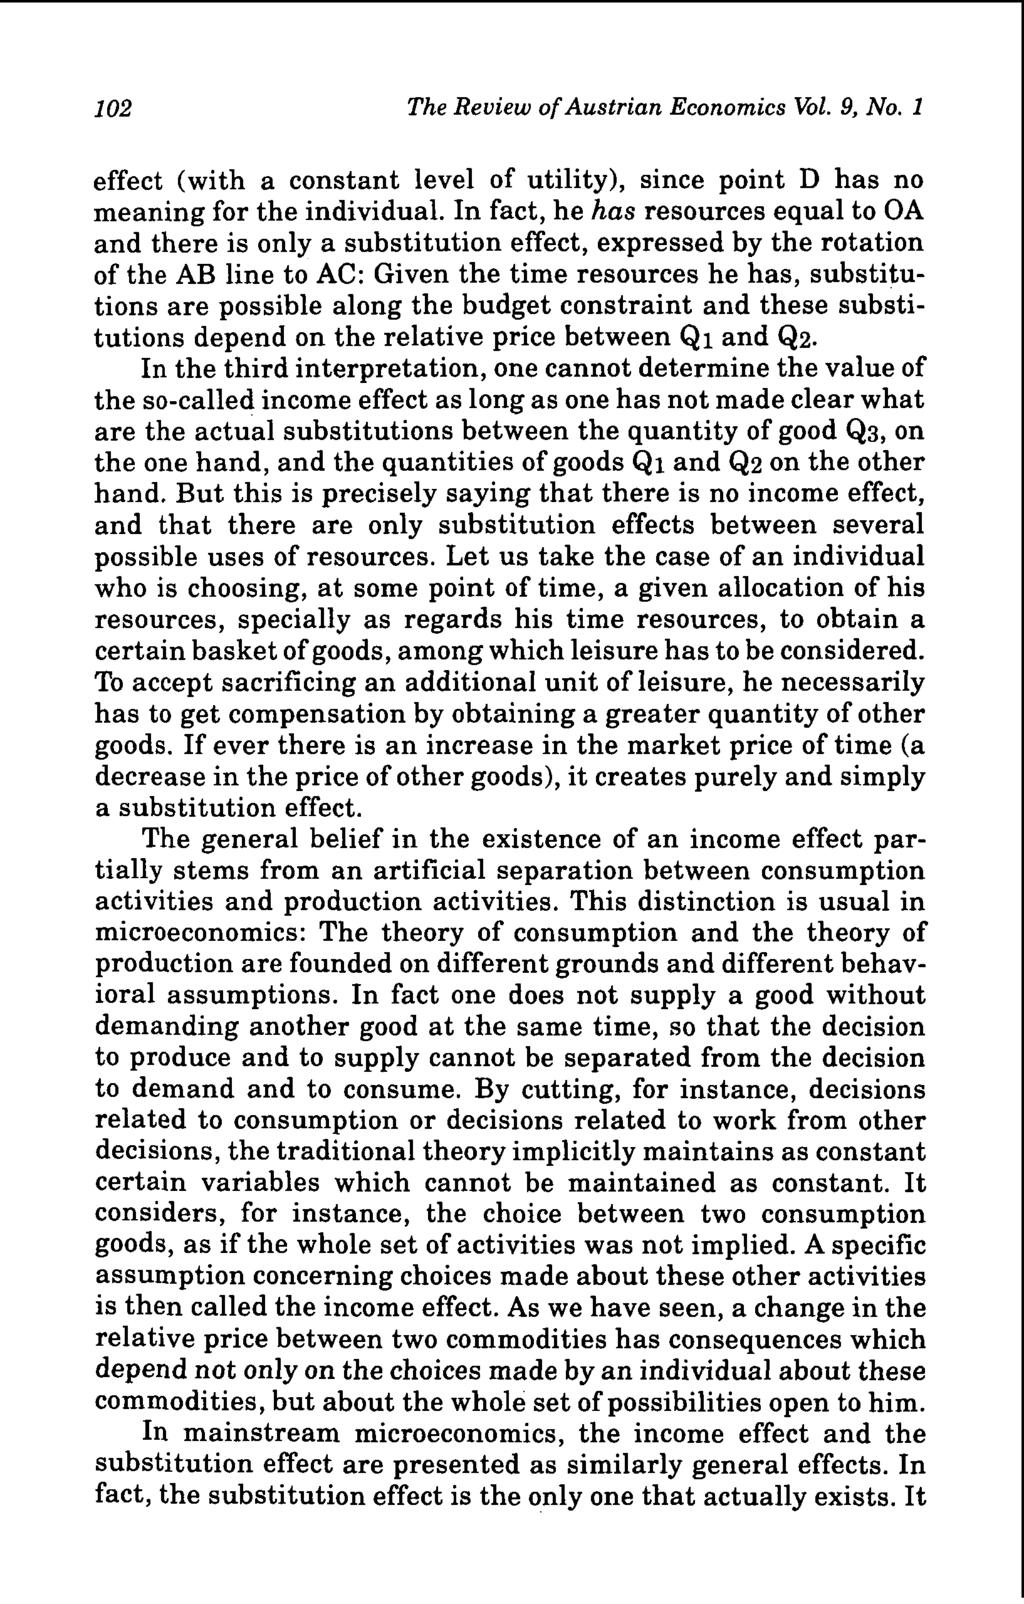 102 The Review of Austrian Economics Vol. 9, No. 1 effect (with a constant level of utility), since point D has no meaning for the individual.